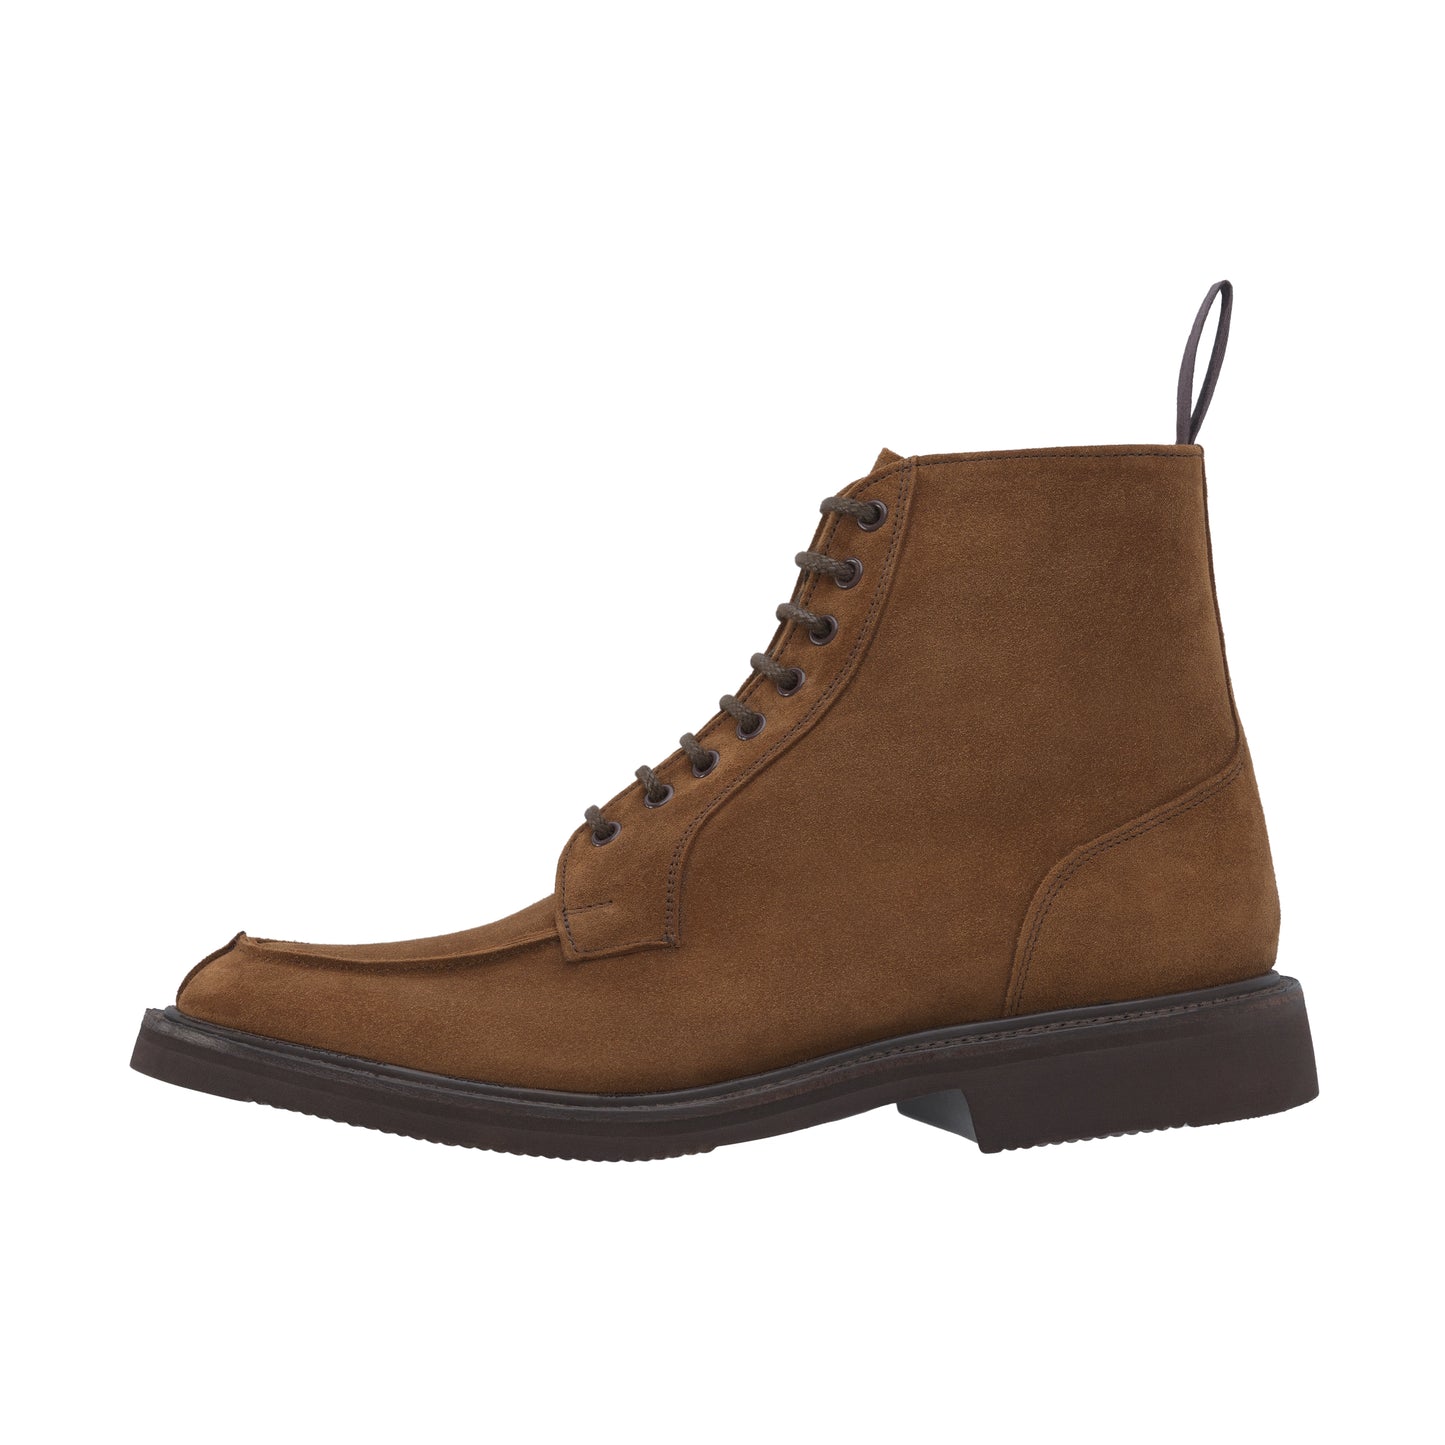 "Lawrence" Apron Front Derby Boots in Cubana